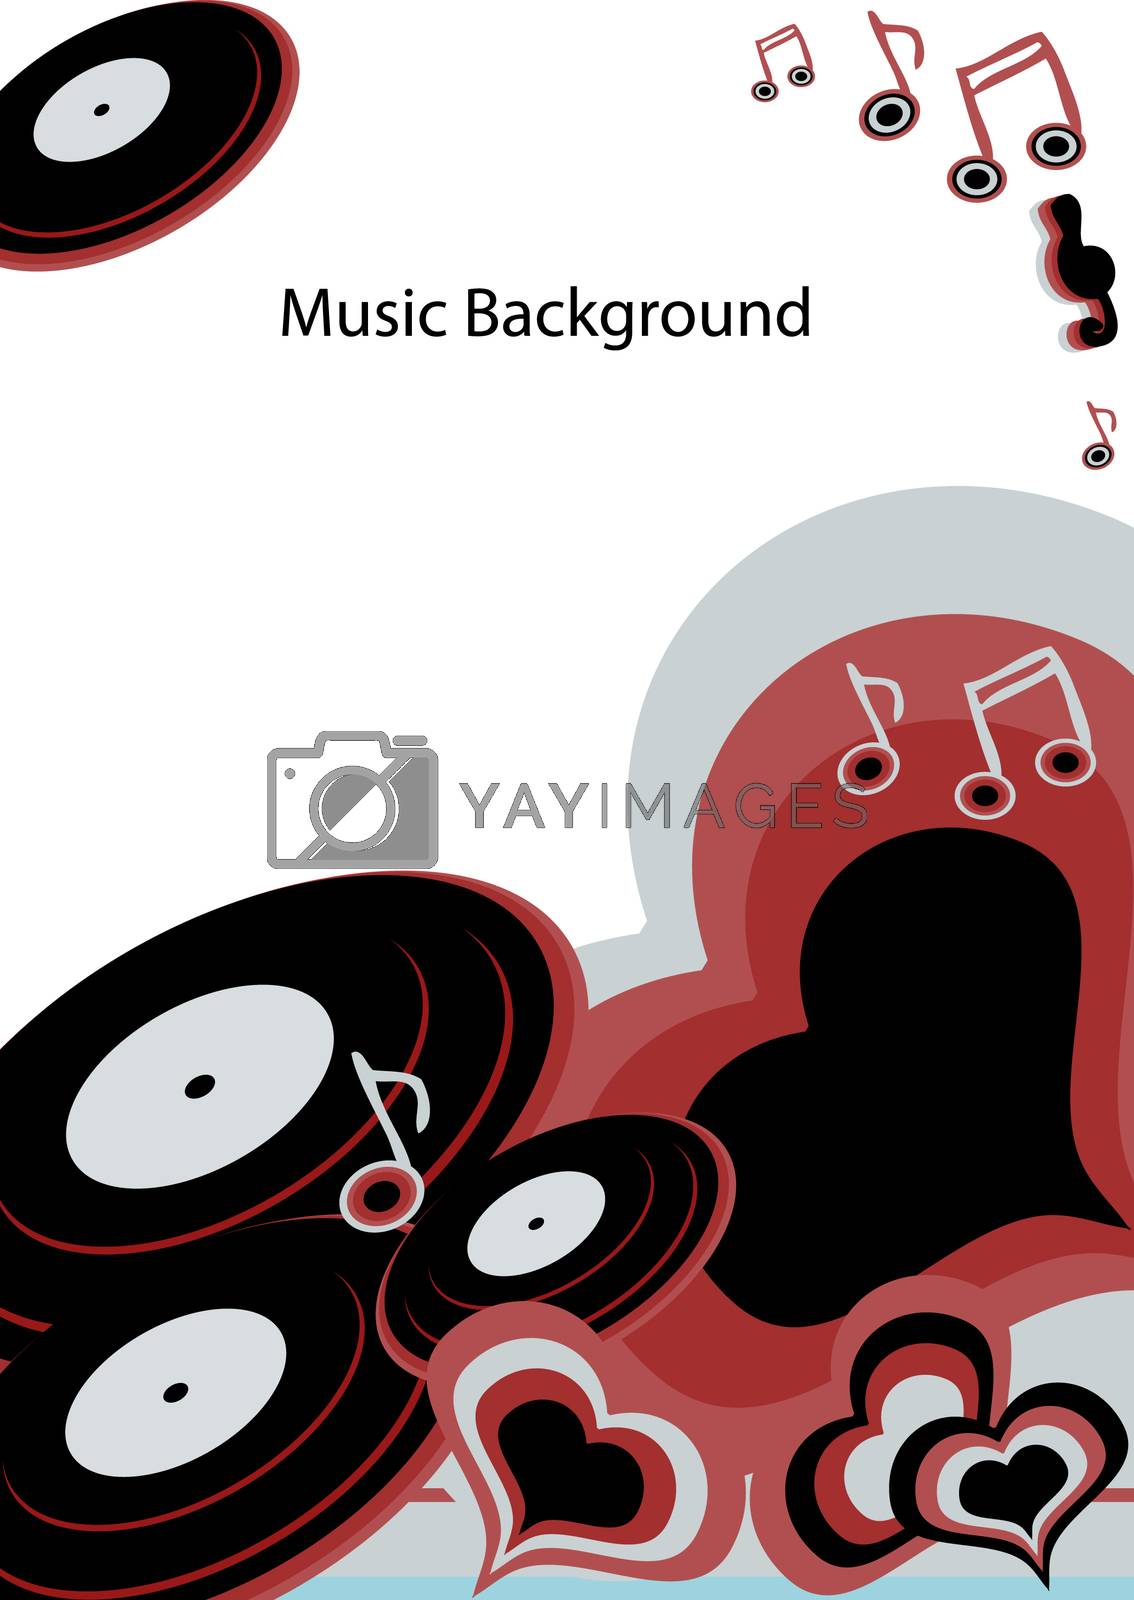 Royalty free image of Music background, vintage retro card, vynil love by IconsJewelry